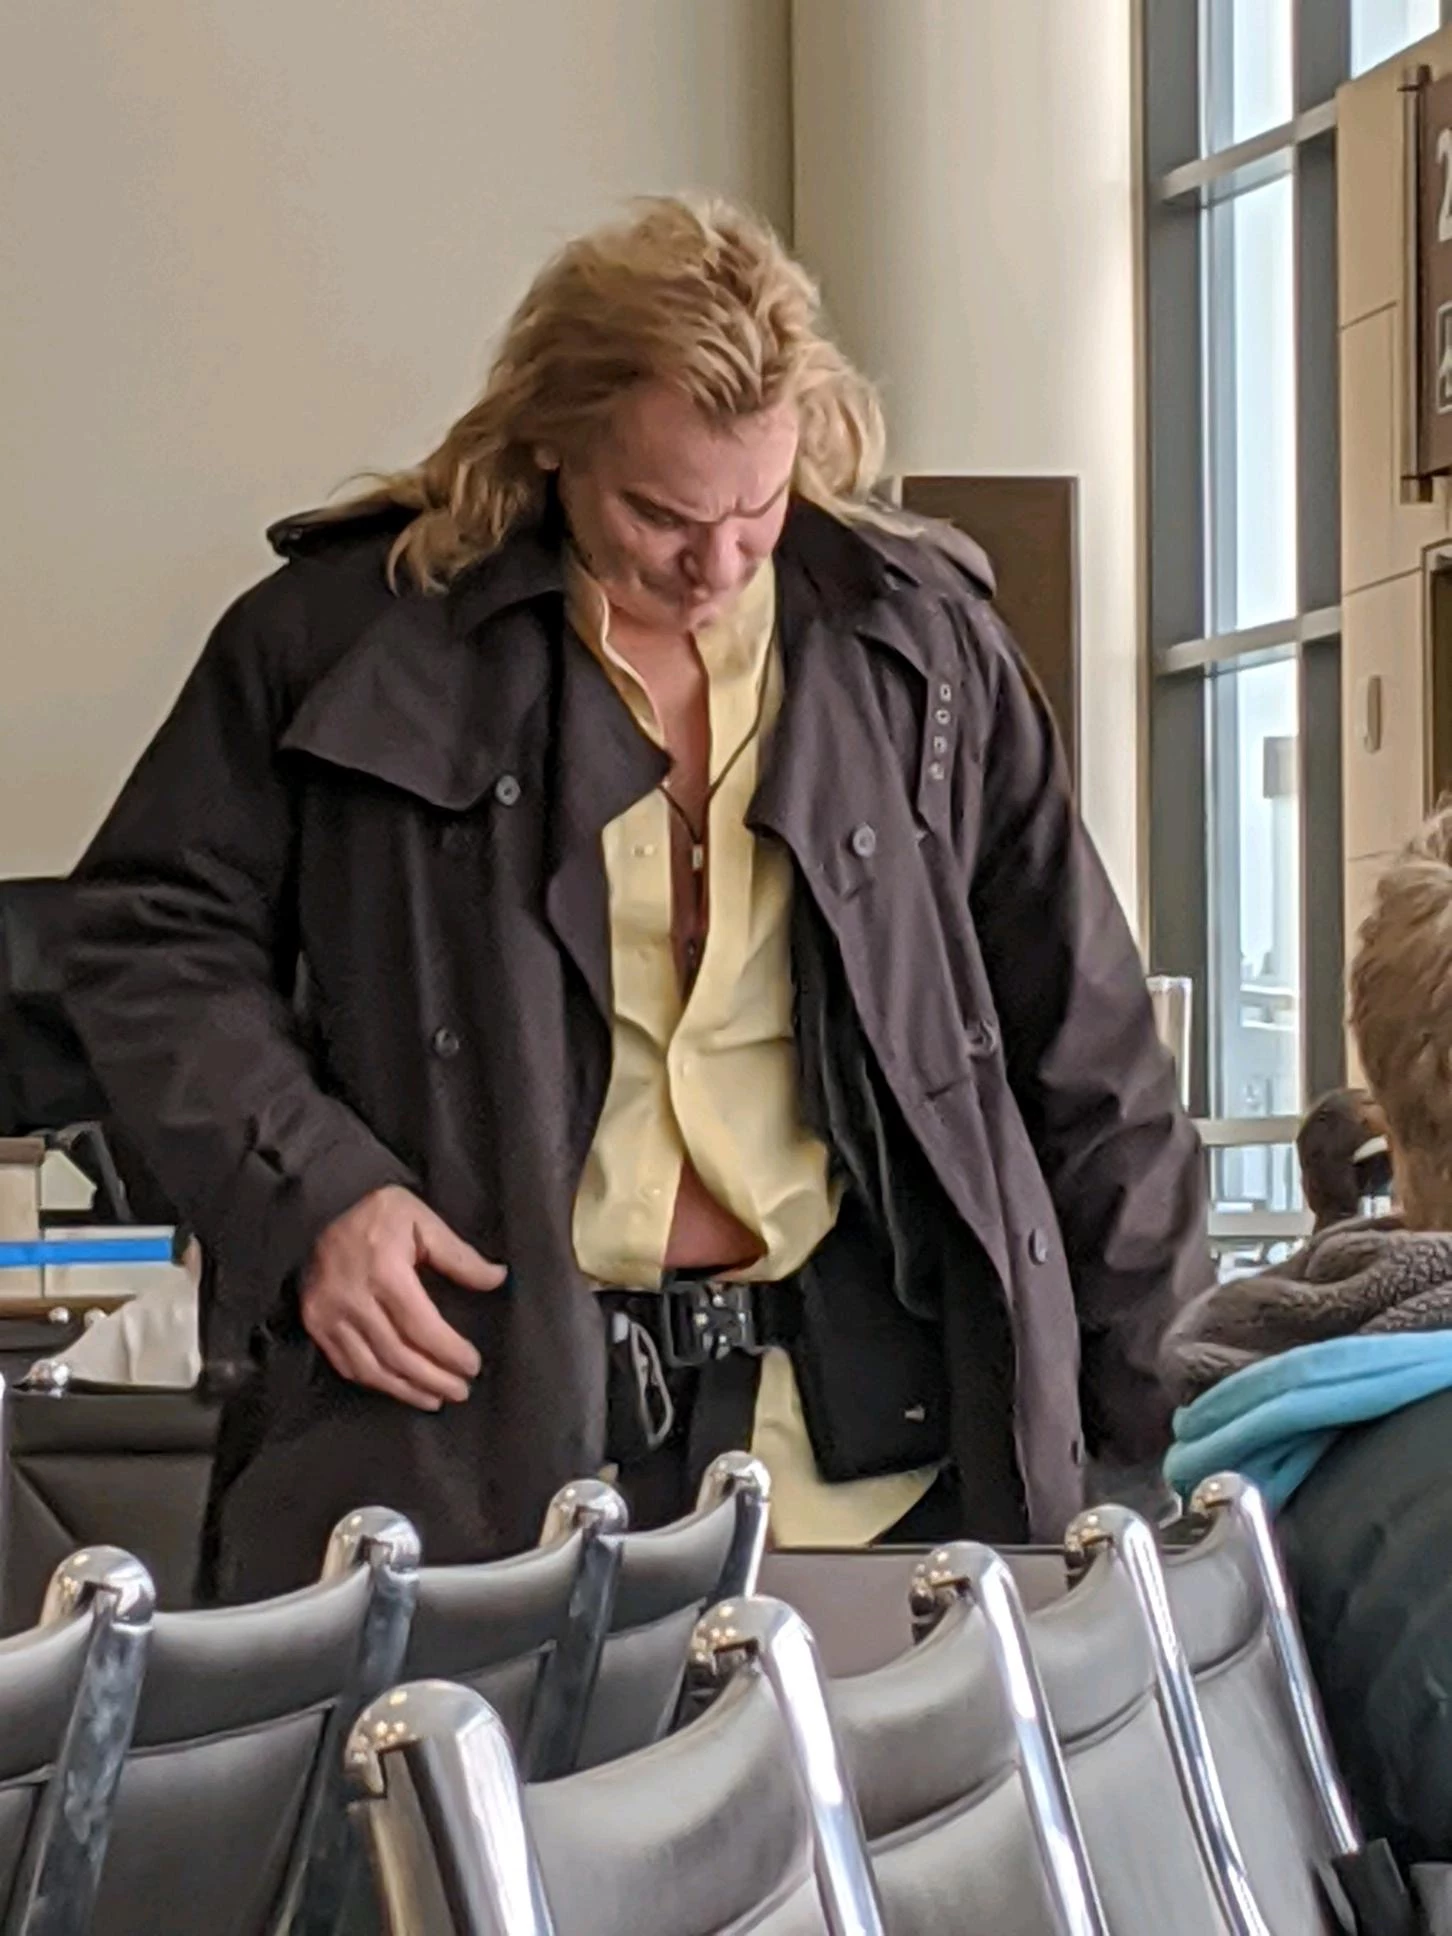 Pirates Movie Evan Stone - Famous Porn Star Spotted At Kalamazoo Airport Sunday